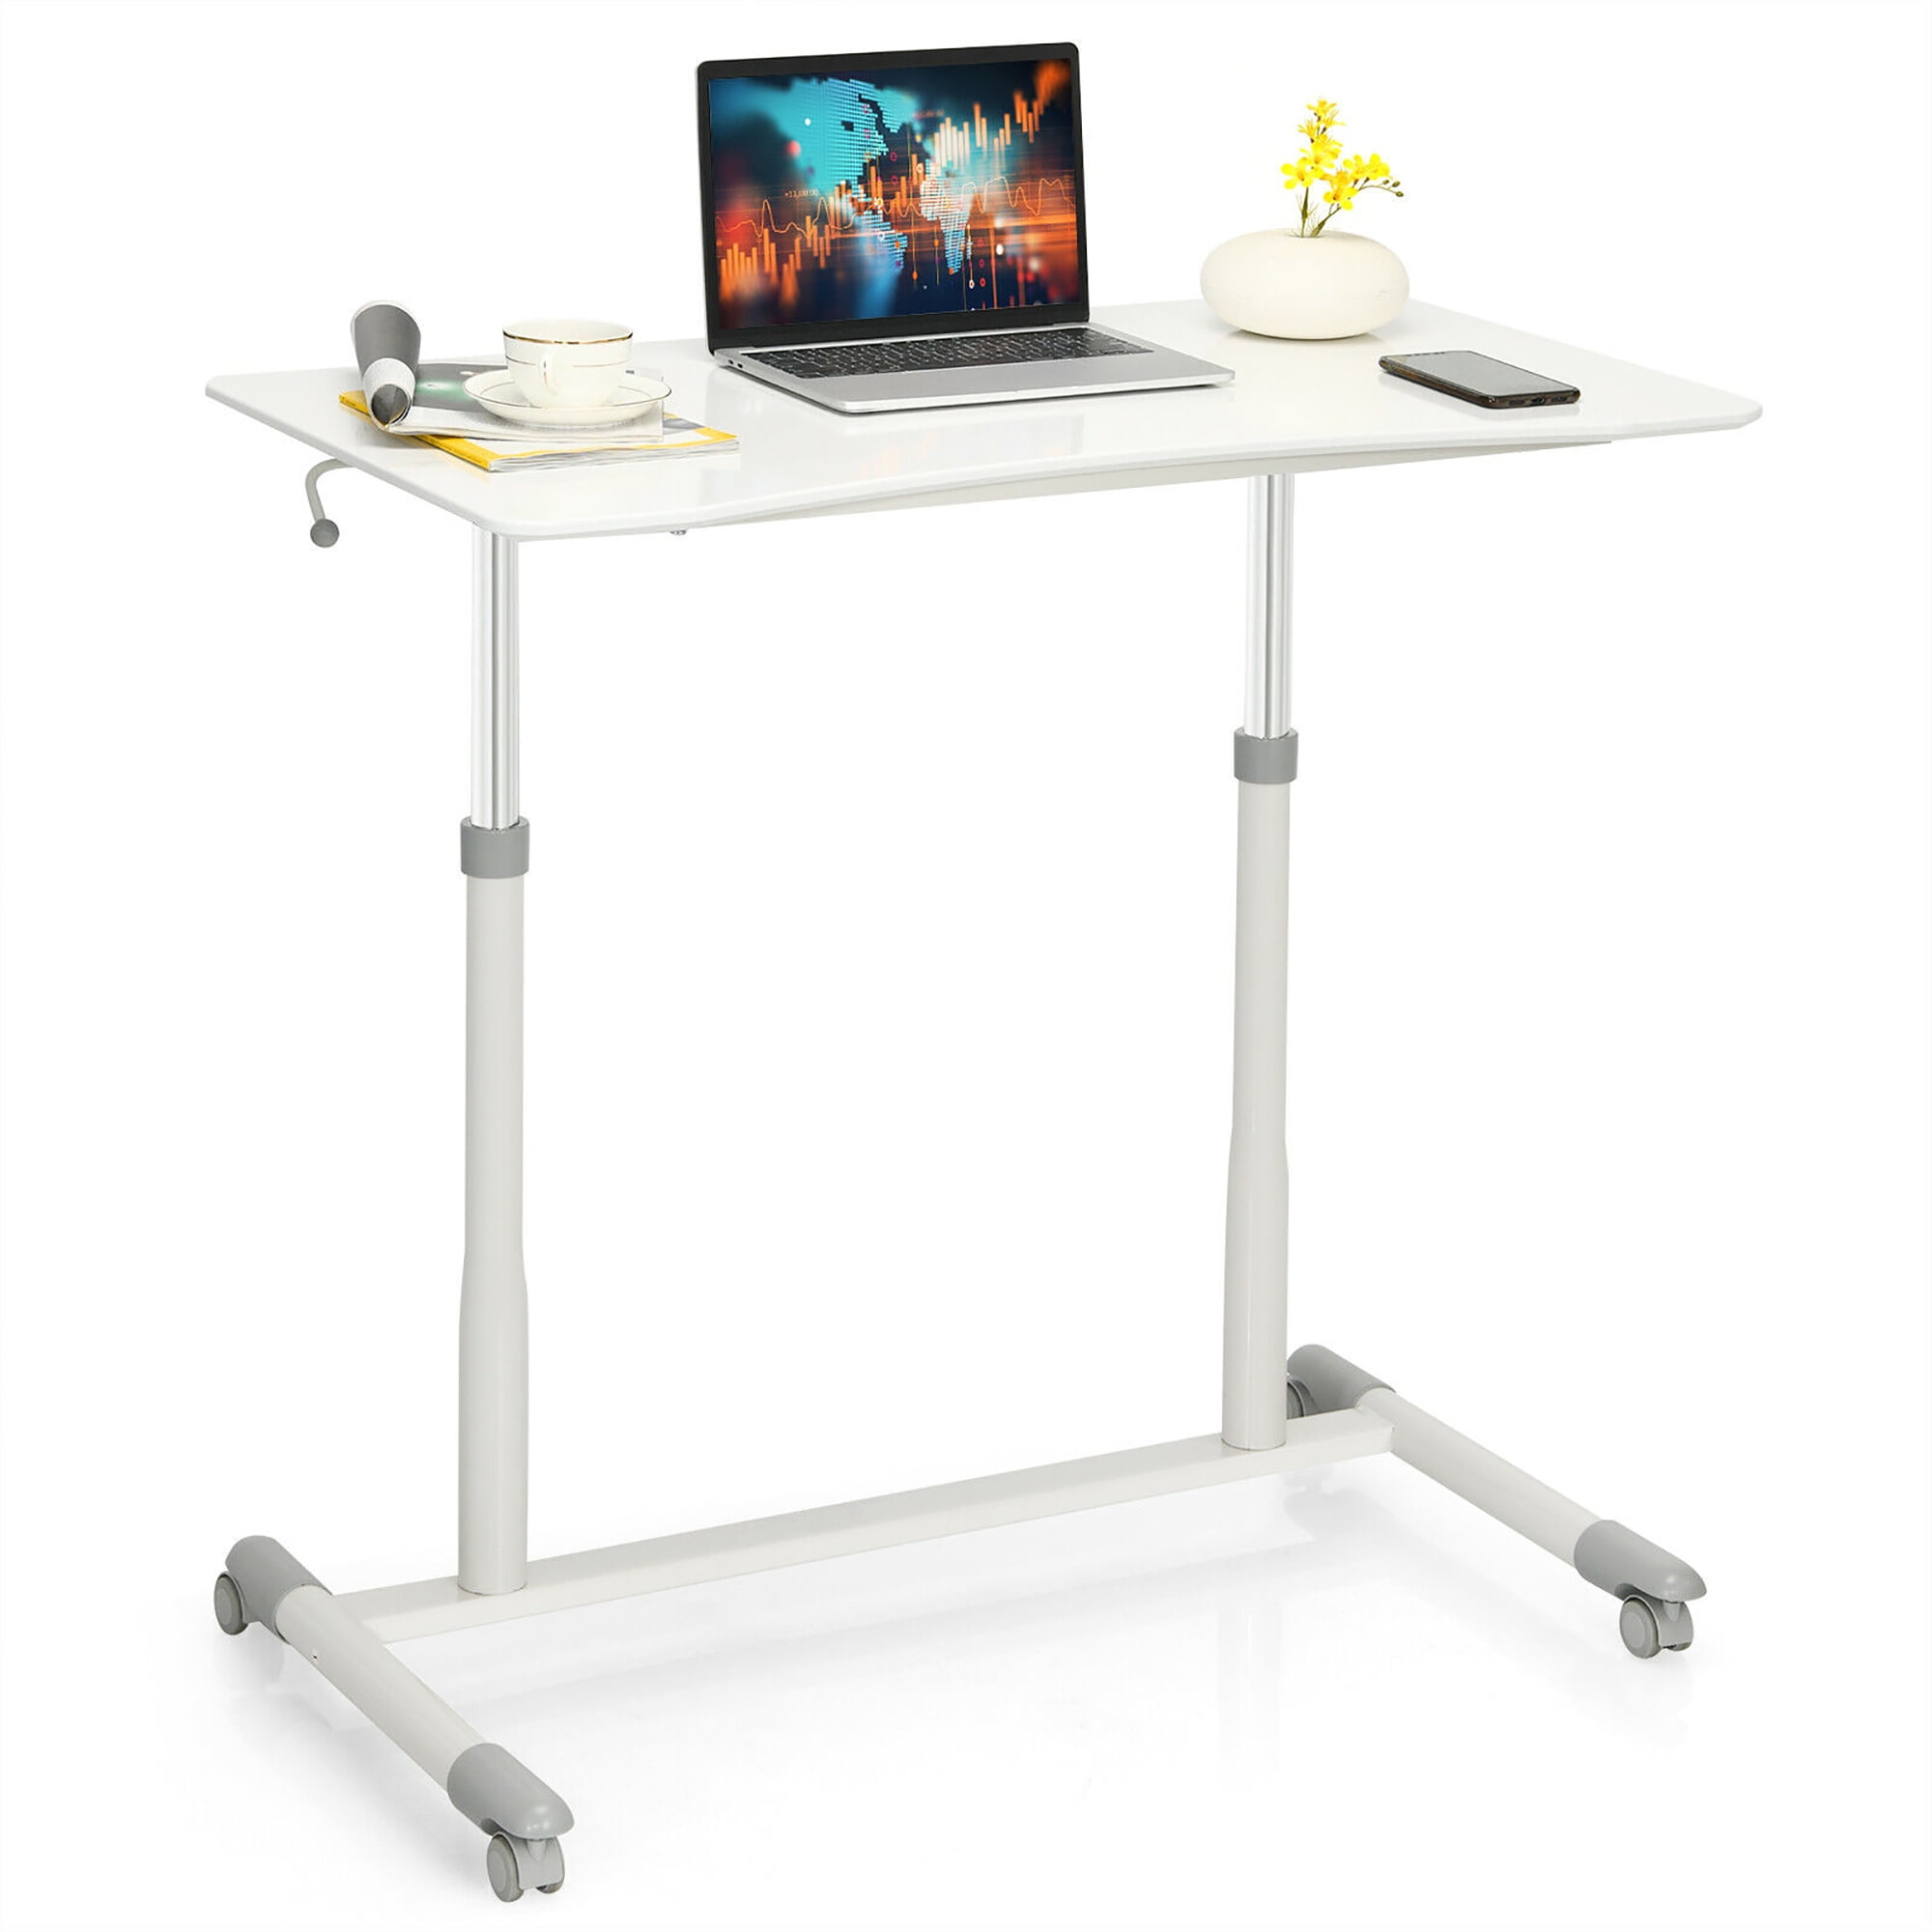 28 Inch Height Adjustable Laptop Sit Stand Desk with Wheels White Adjustable Rolling Standing Laptop Mobile Desk Cart Coffee Table